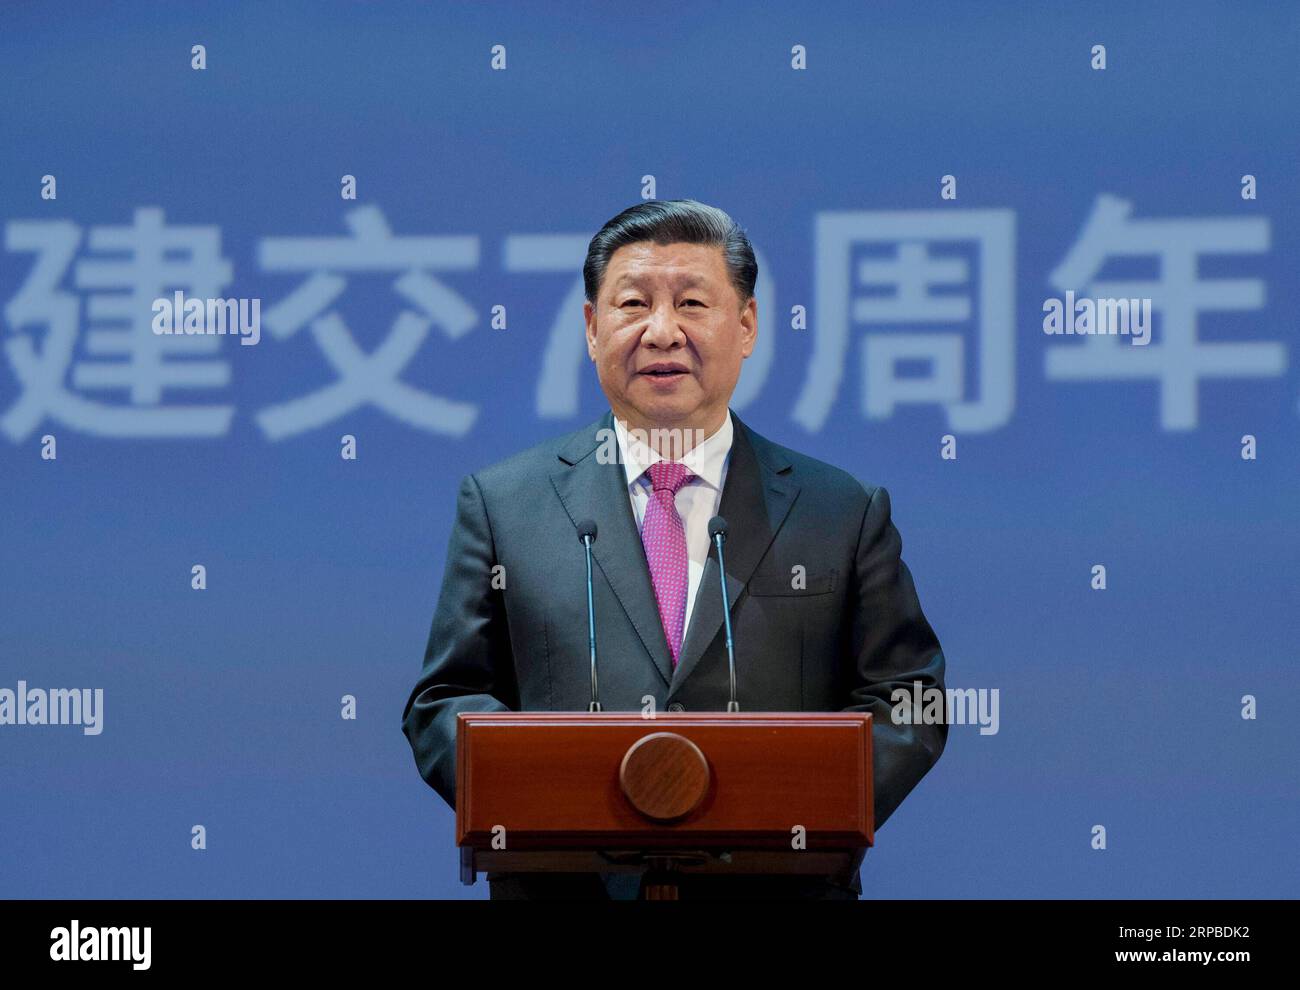 (190606) -- MOSCOW, June 6, 2019 (Xinhua) -- Chinese President Xi Jinping speaks as he attends a gathering marking the 70th anniversary of the establishment of the China-Russia diplomatic relations at the Bolshoi Theater of Russia in Moscow June 5, 2019. In his speech at the gathering, Xi said the two countries are embracing yet another historic moment in bilateral relations. (Xinhua/Li Xueren) RUSSIA-MOSCOW-CHINA-XI JINPING-PUTIN-70TH ANNIVERSARY-DIPLOMATIC TIES PUBLICATIONxNOTxINxCHN Stock Photo